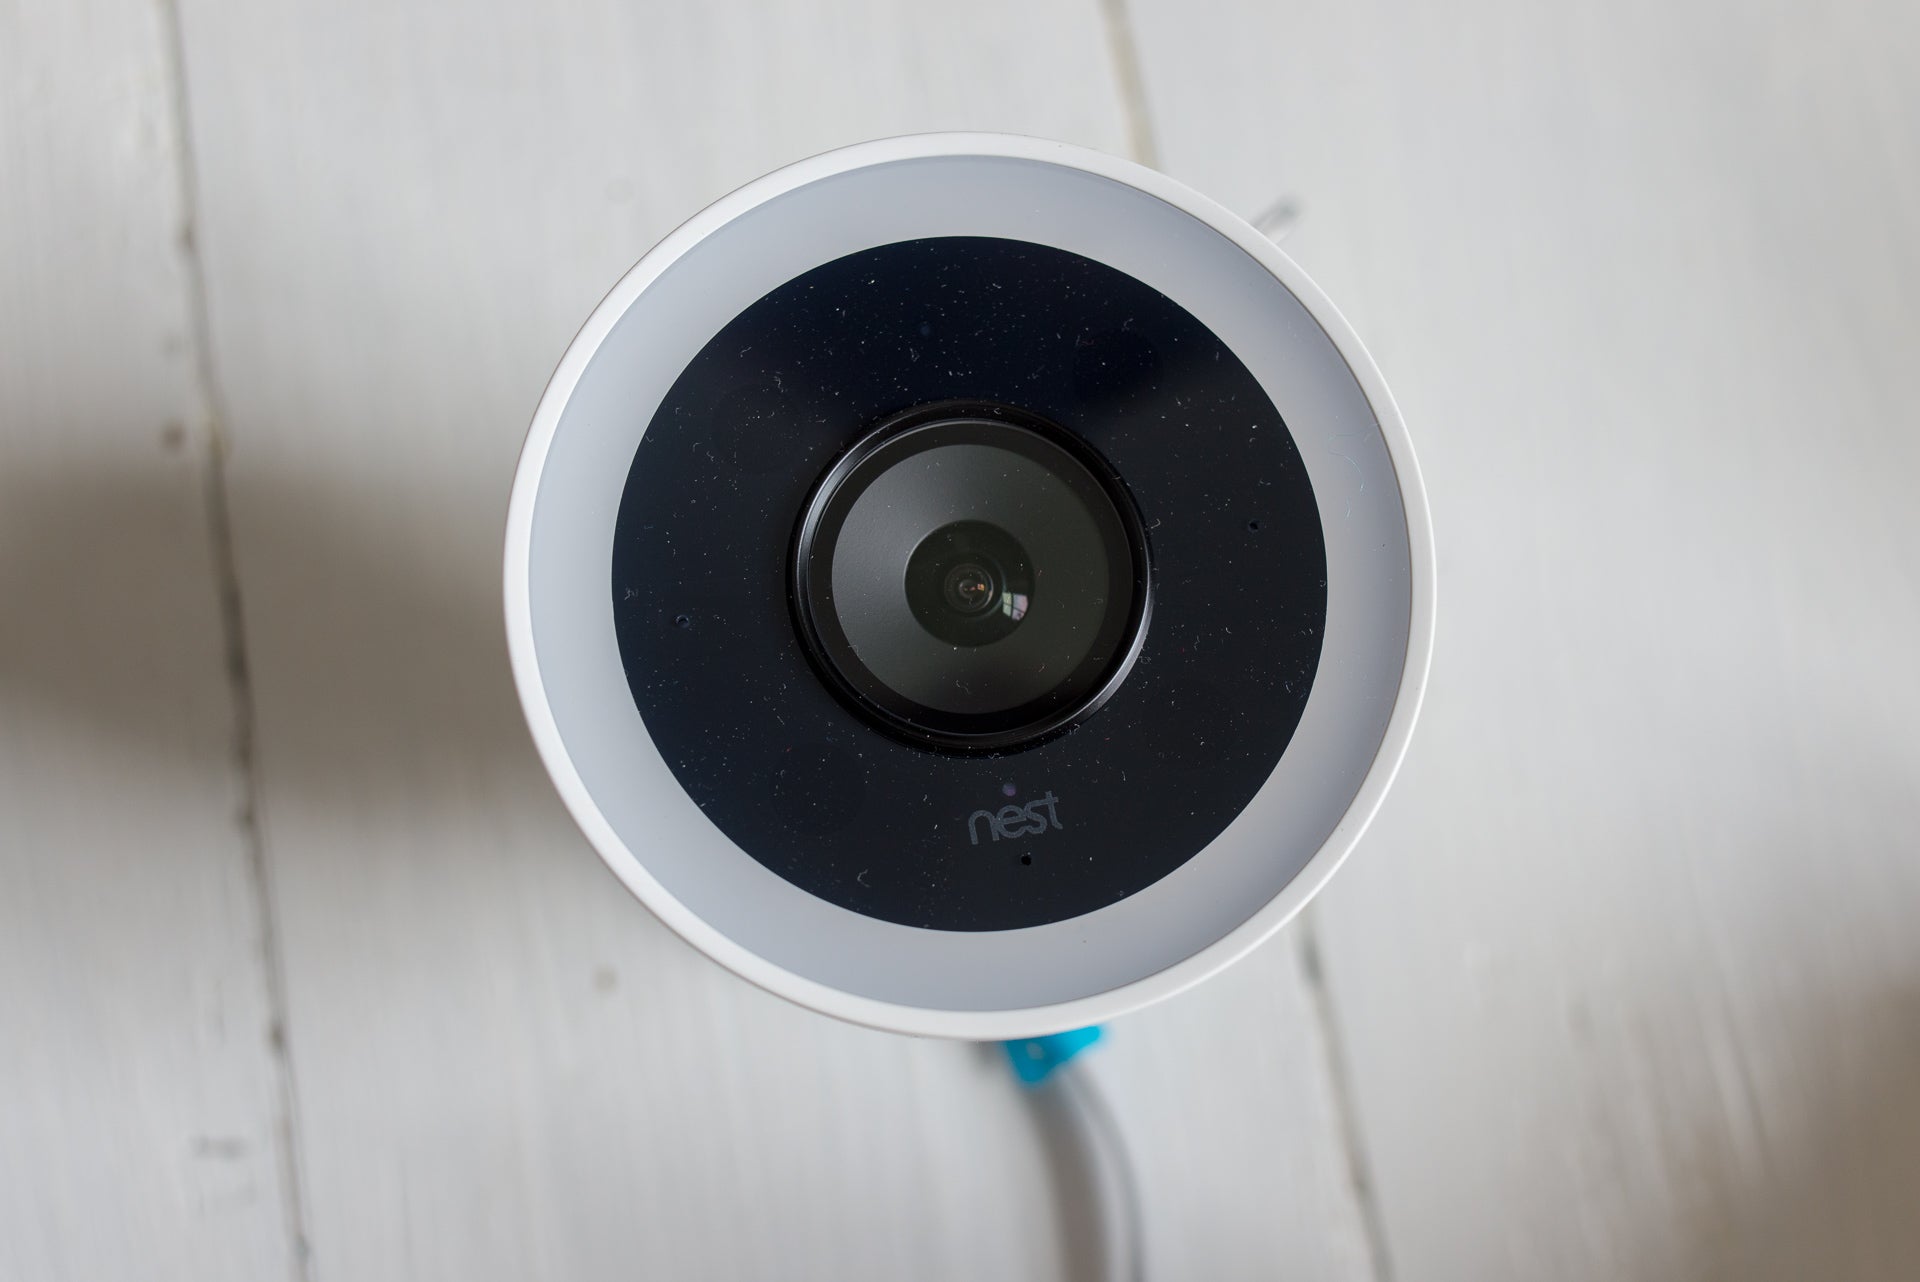 Nest Cam IQ Outdoor security camera on white surface.